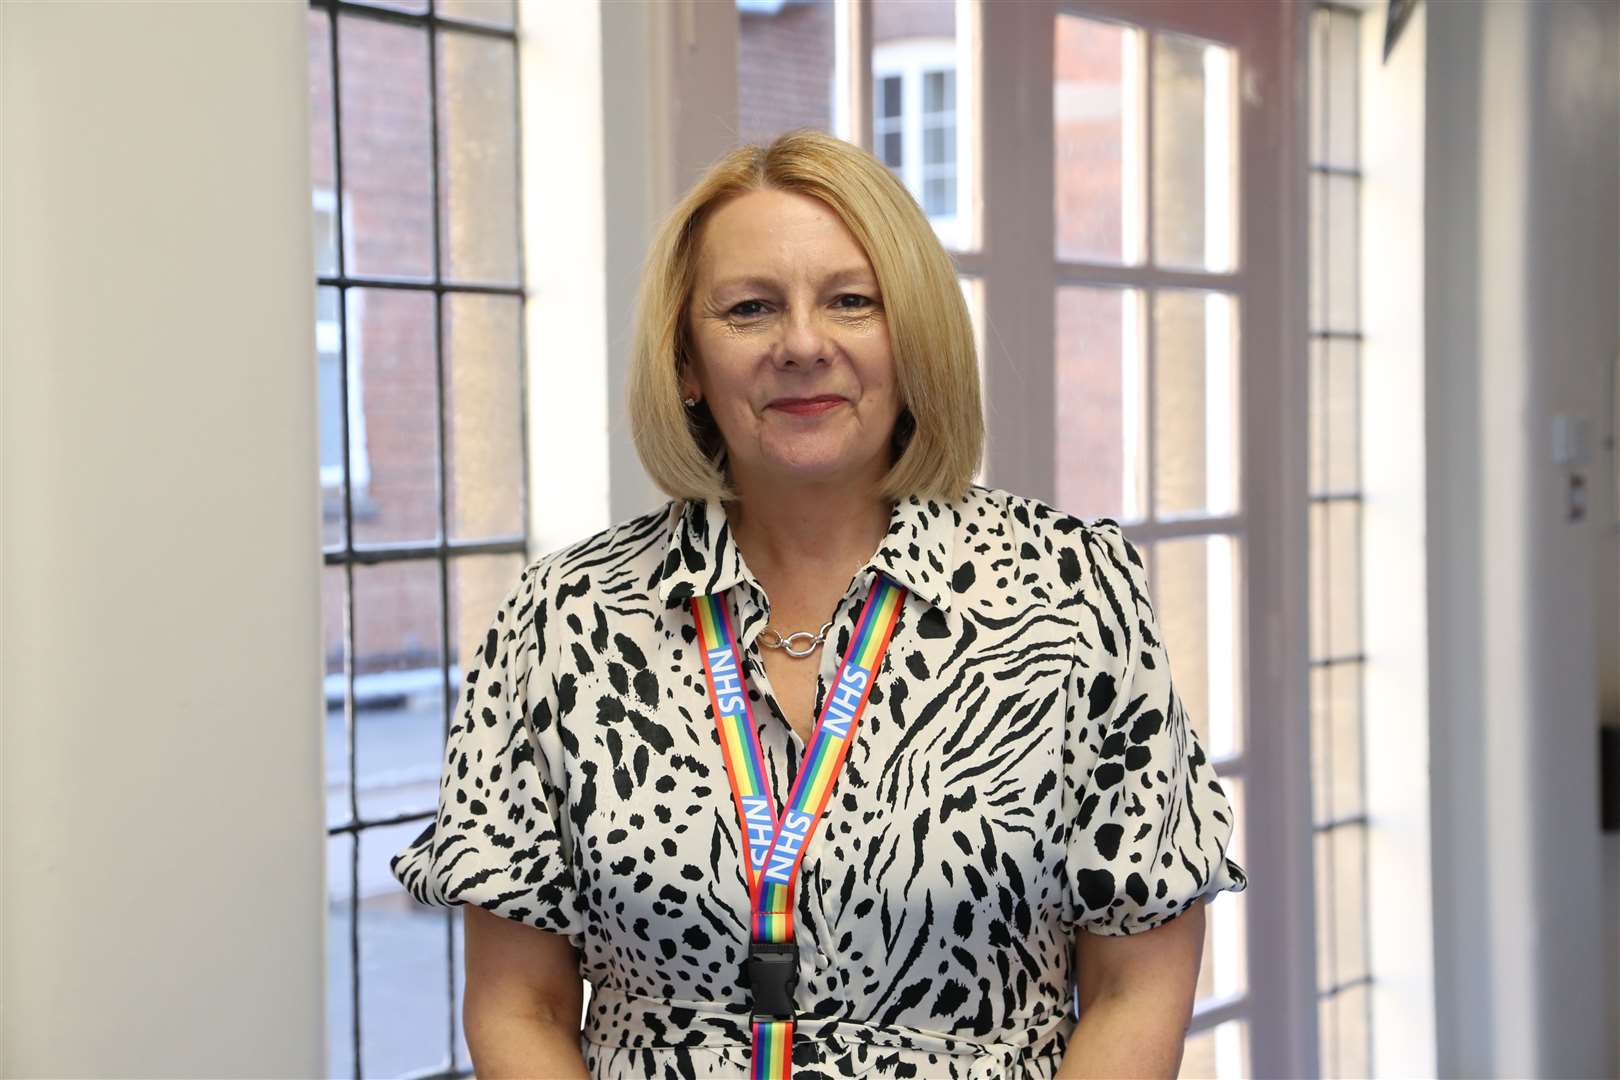 Jayne Black, chief executive of Medway NHS Foundation Trust